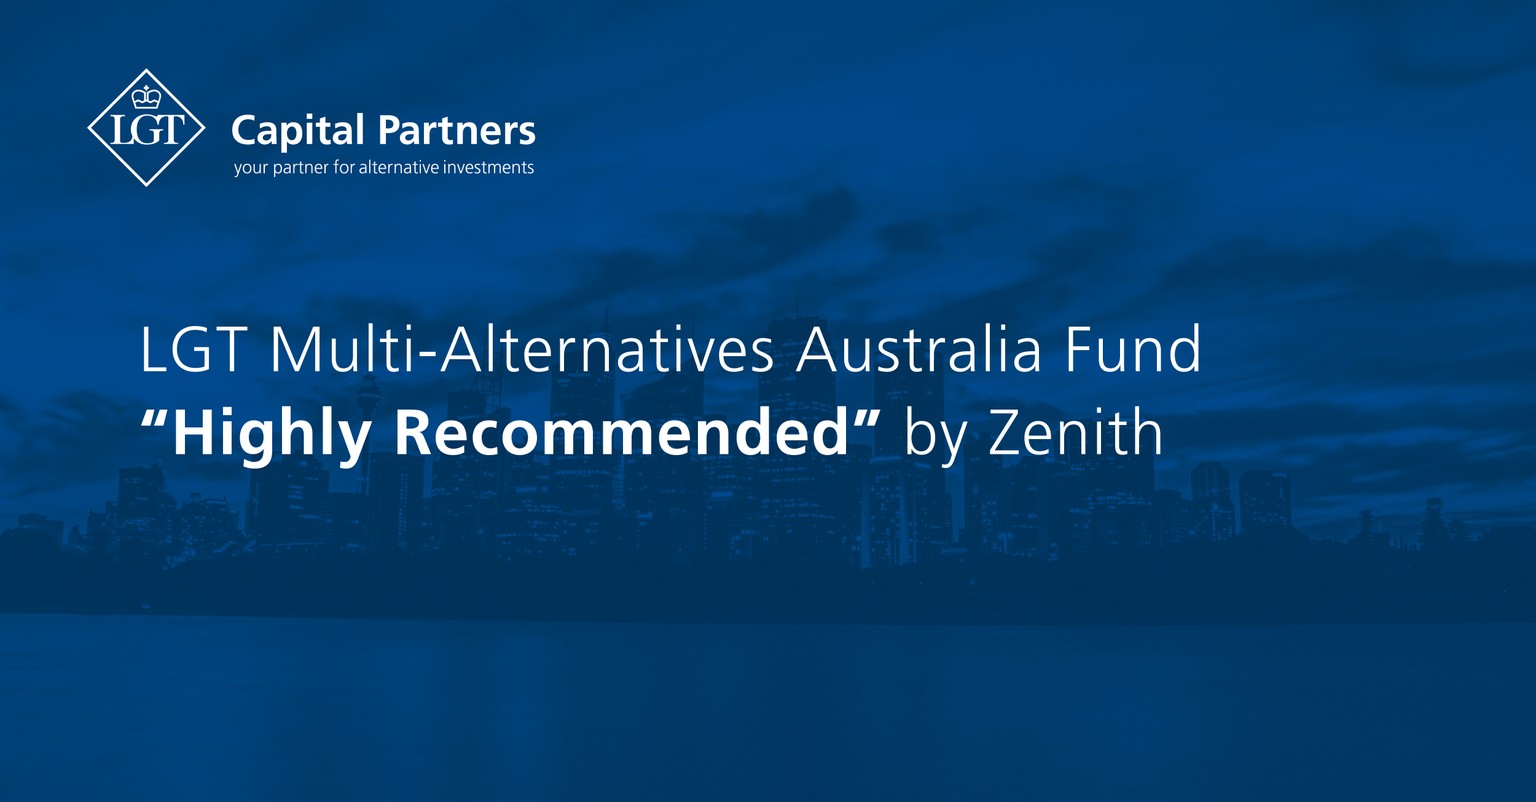 LGT-Multi-Alternatives-Australia-Fund-receives-Highly-Recommended-rating-by-Zenith-Investment-Partners